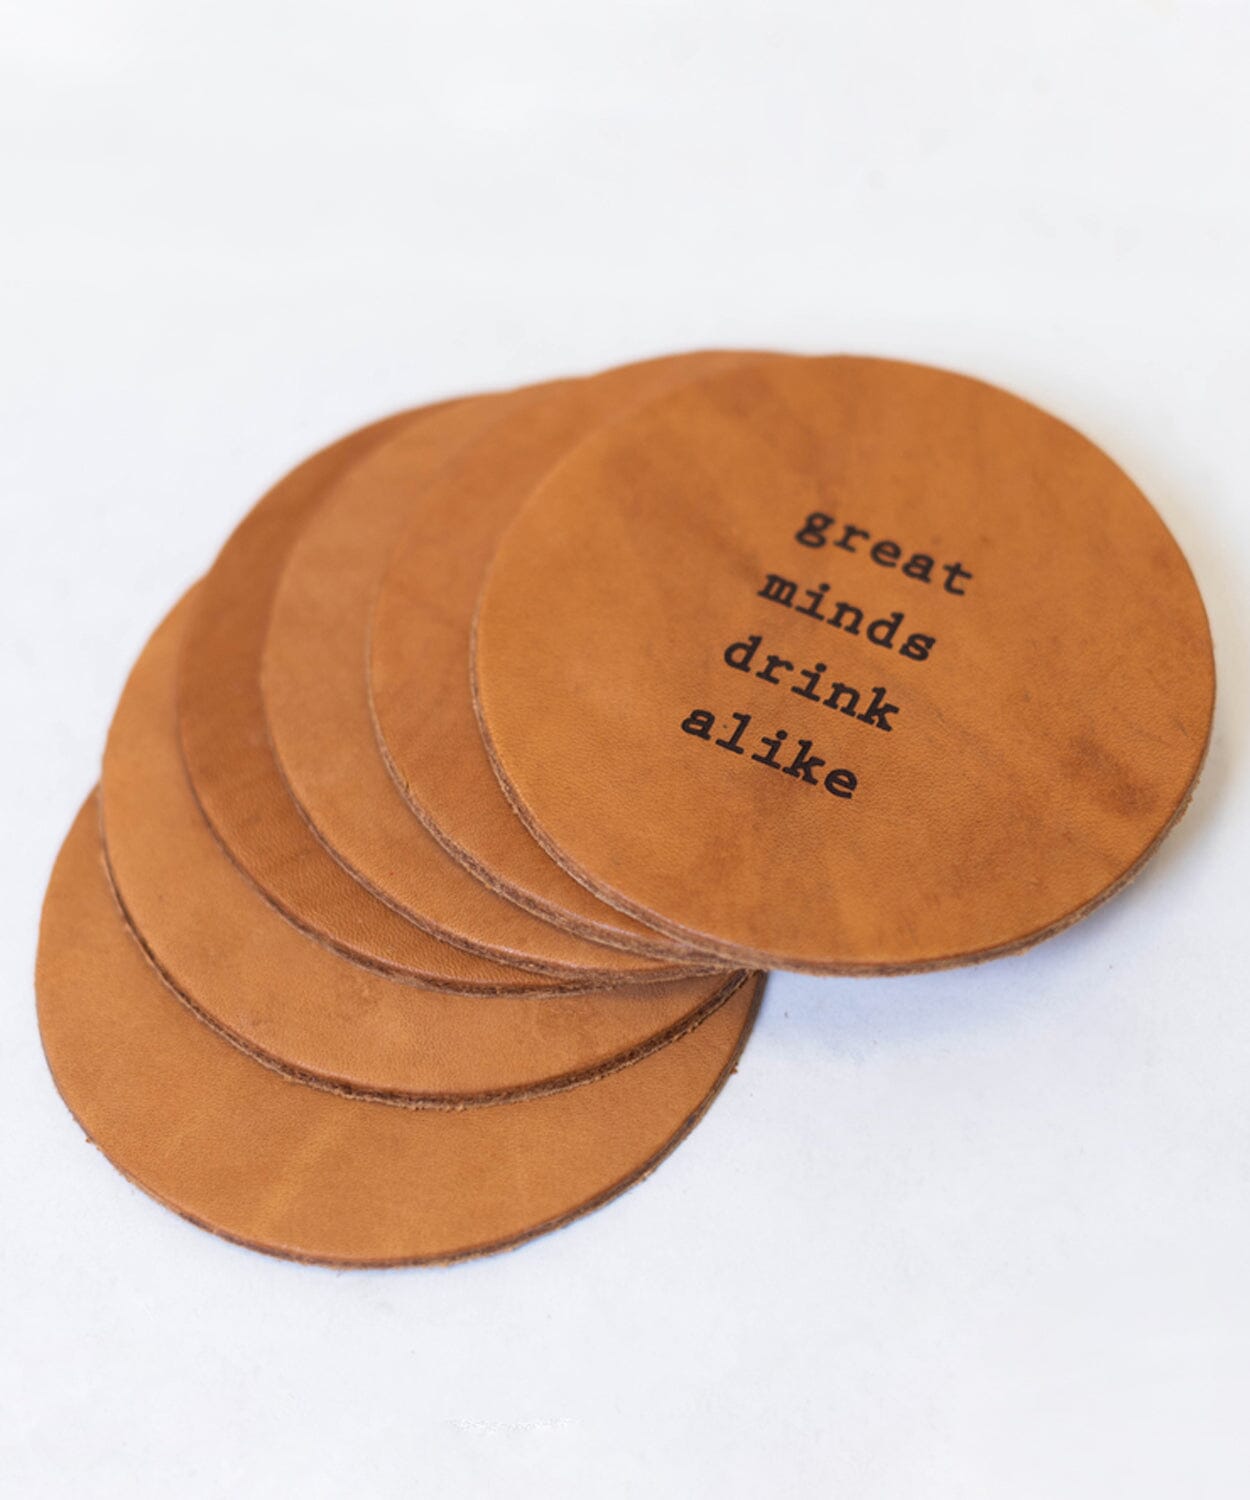 Great Minds Drink Alike - 6 Piece Coaster Set Accessories OOBE BRAND 